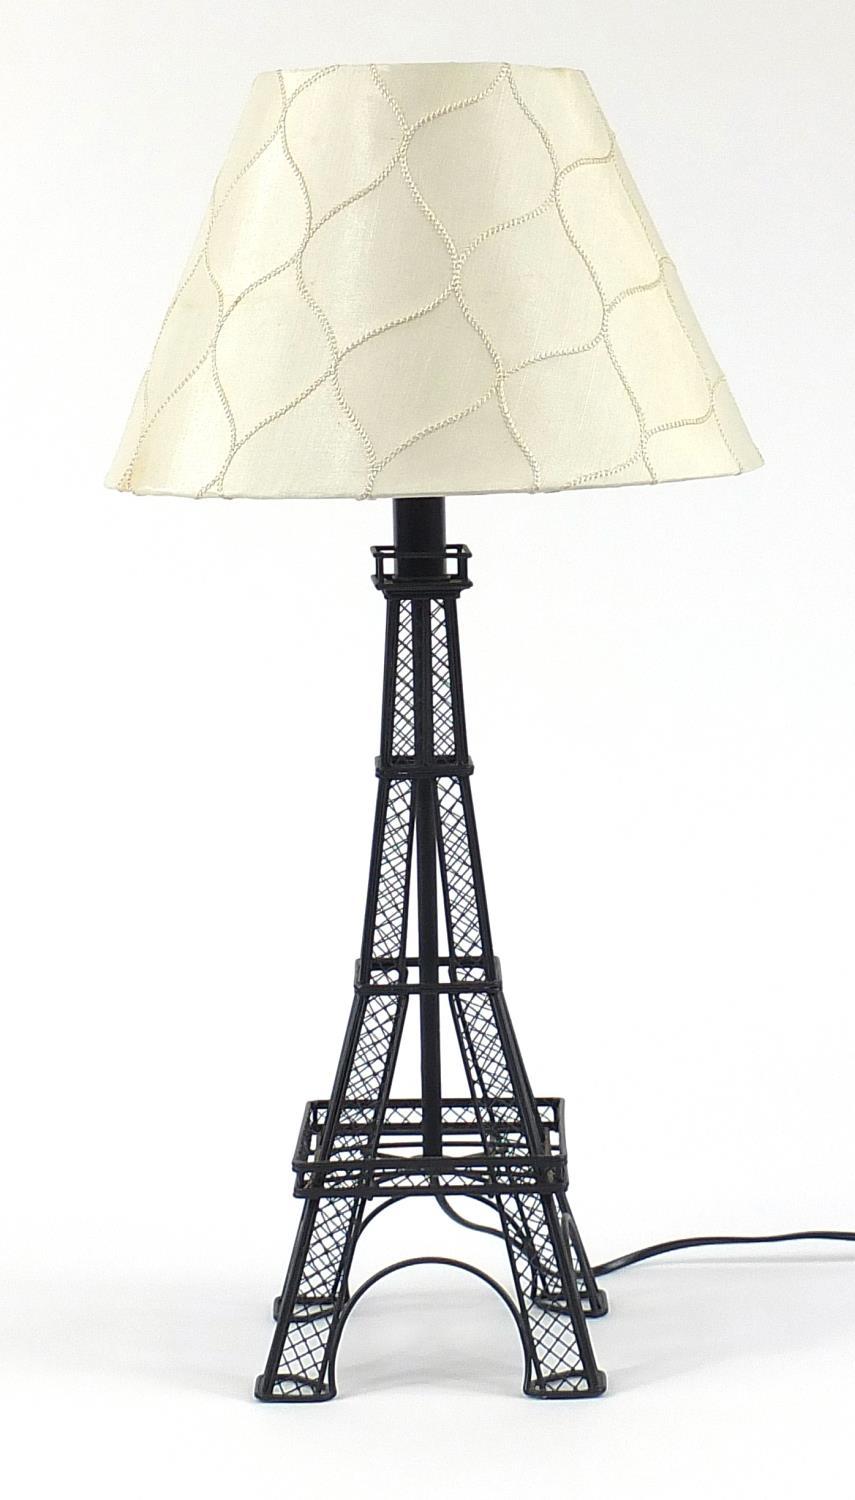 Black metal table lamp in the form of the Eiffel Tower, 61cm high